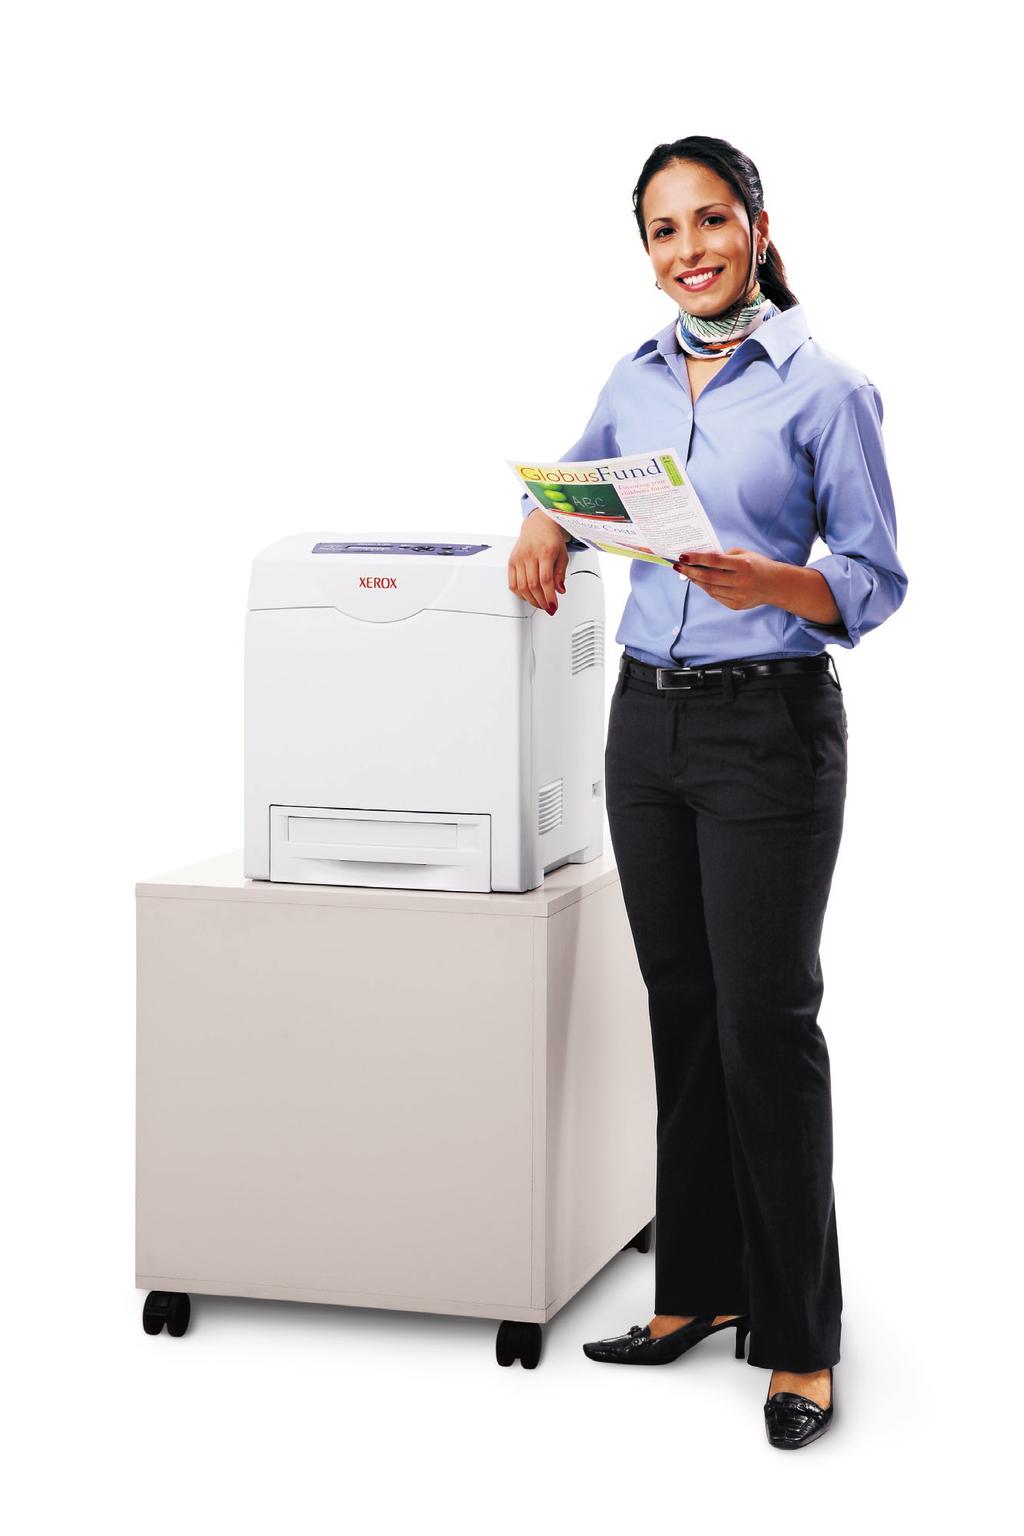 About this Guide This guide will introduce you to the Xerox Phaser 6180 color laser printer, and help you in your printer evaluation process.